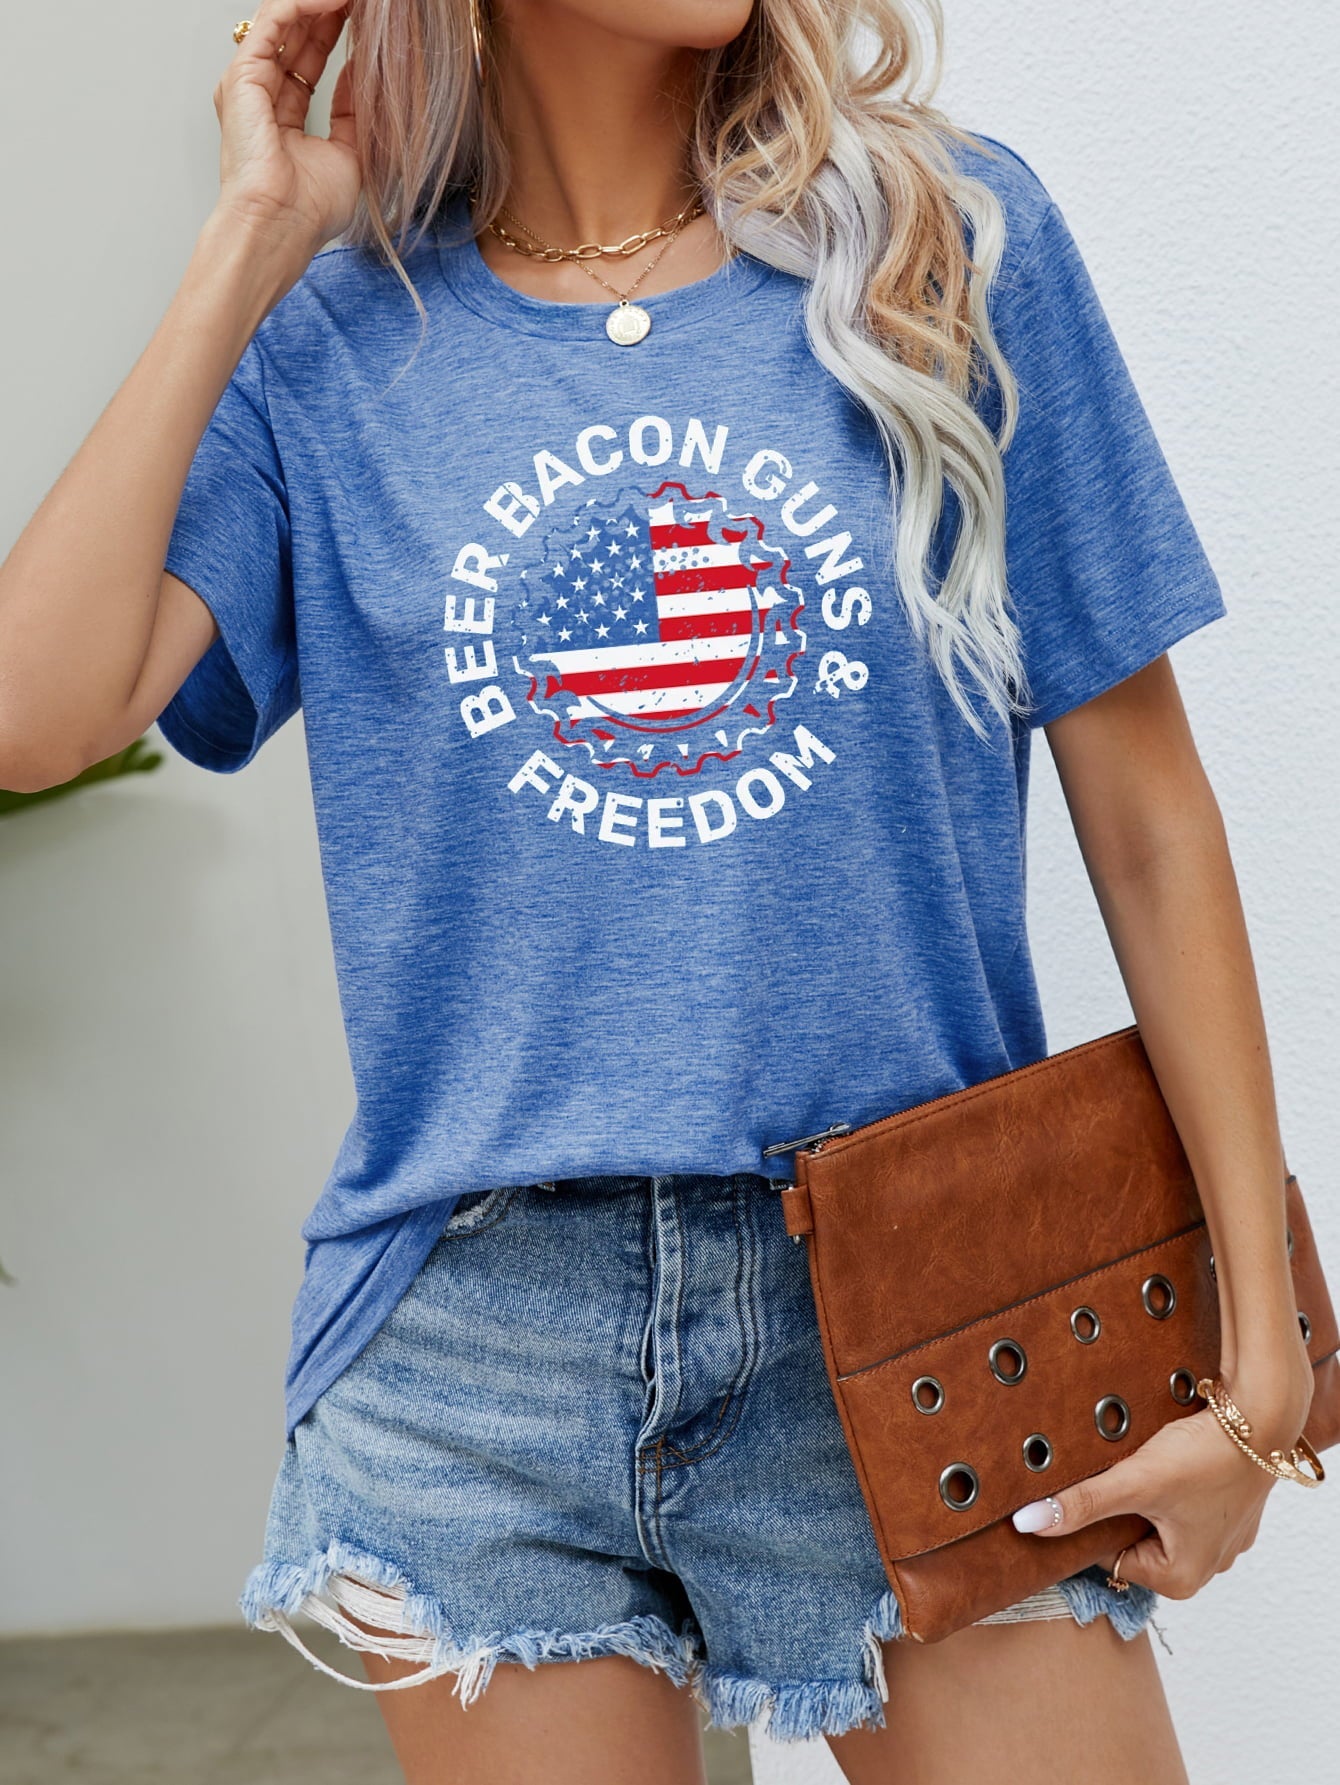 BEER BACON GUNS & FREEDOM US Flag Graphic Tee - OMG! Rose